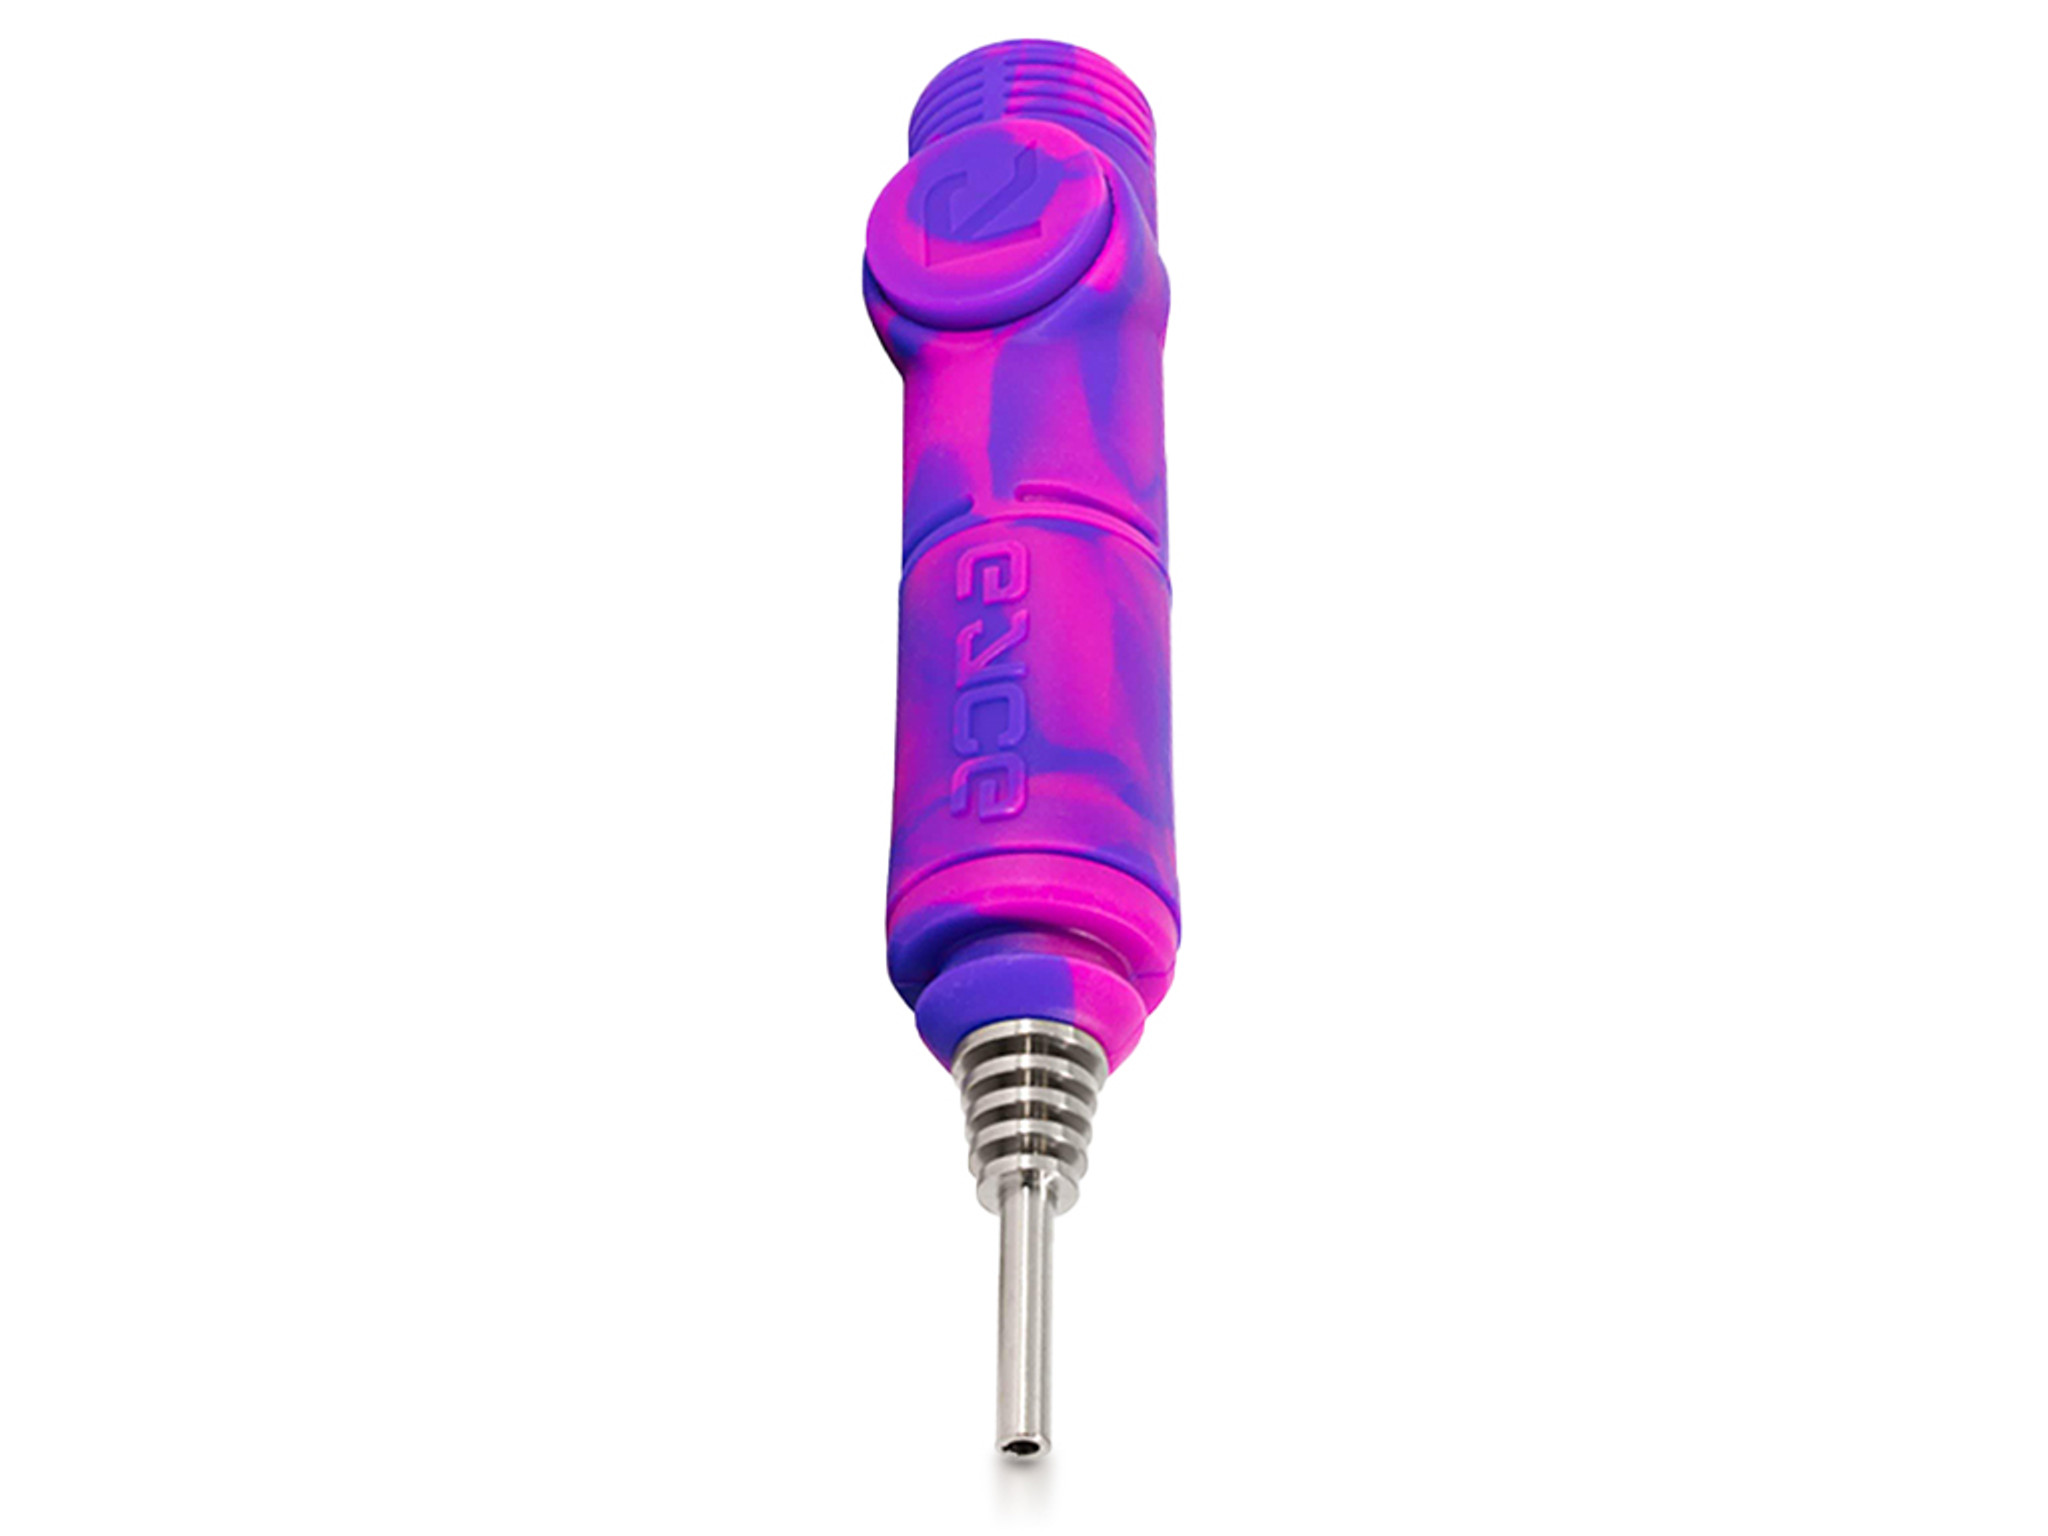 Silicone Nectar Collector by Eyce